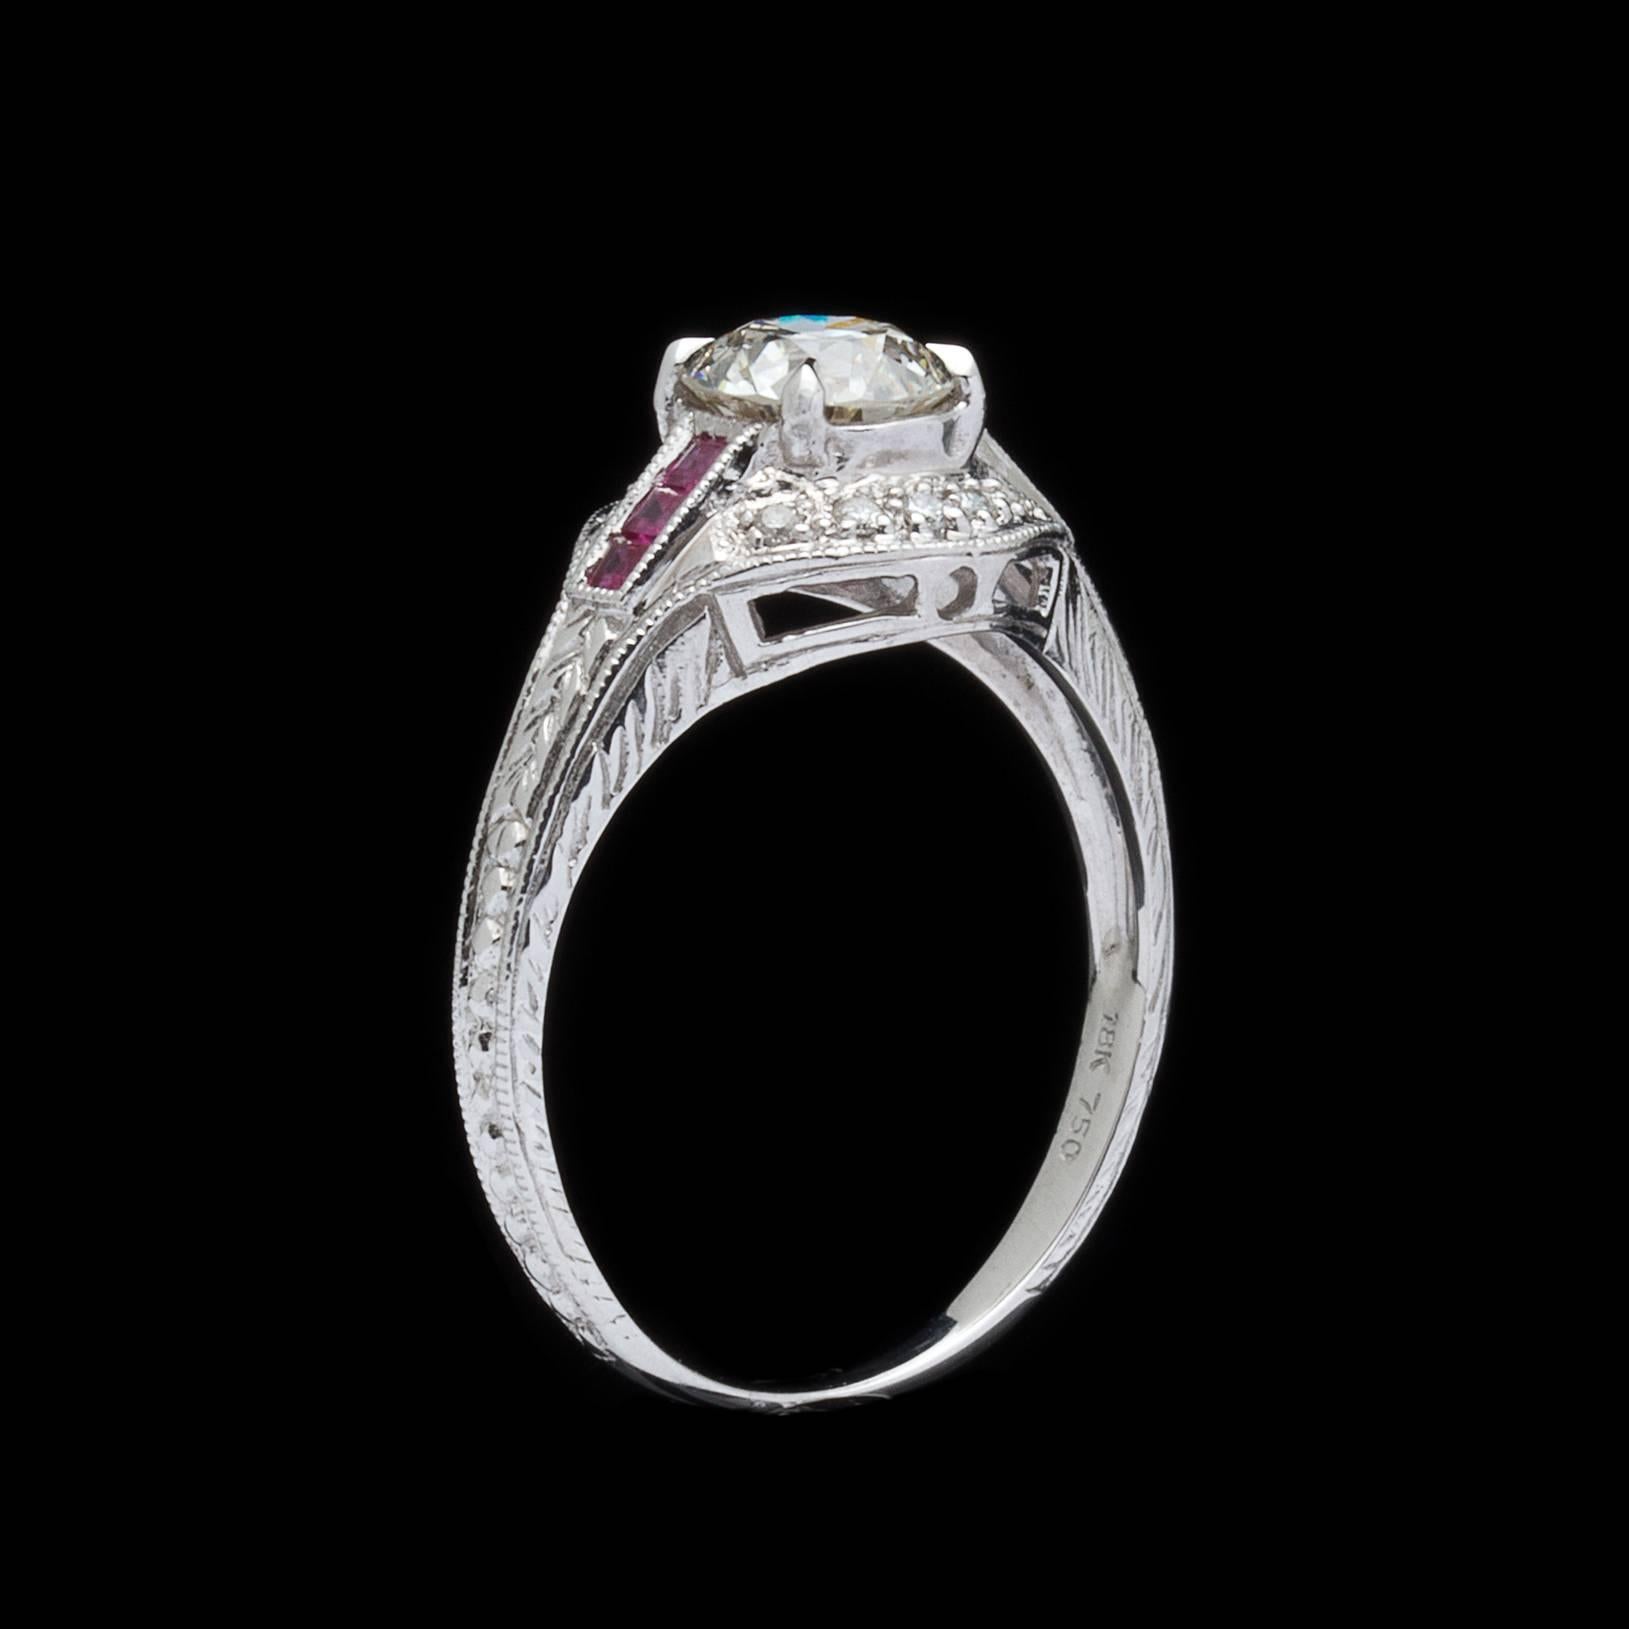 Featuring the details of classic hand engraved rings, this engagement ring centers a European-cut diamond weighing approximately 1.00-ct., with I color and VS2 clarity. The 18k white gold mounting is accented with square-cut rubies and 10 round